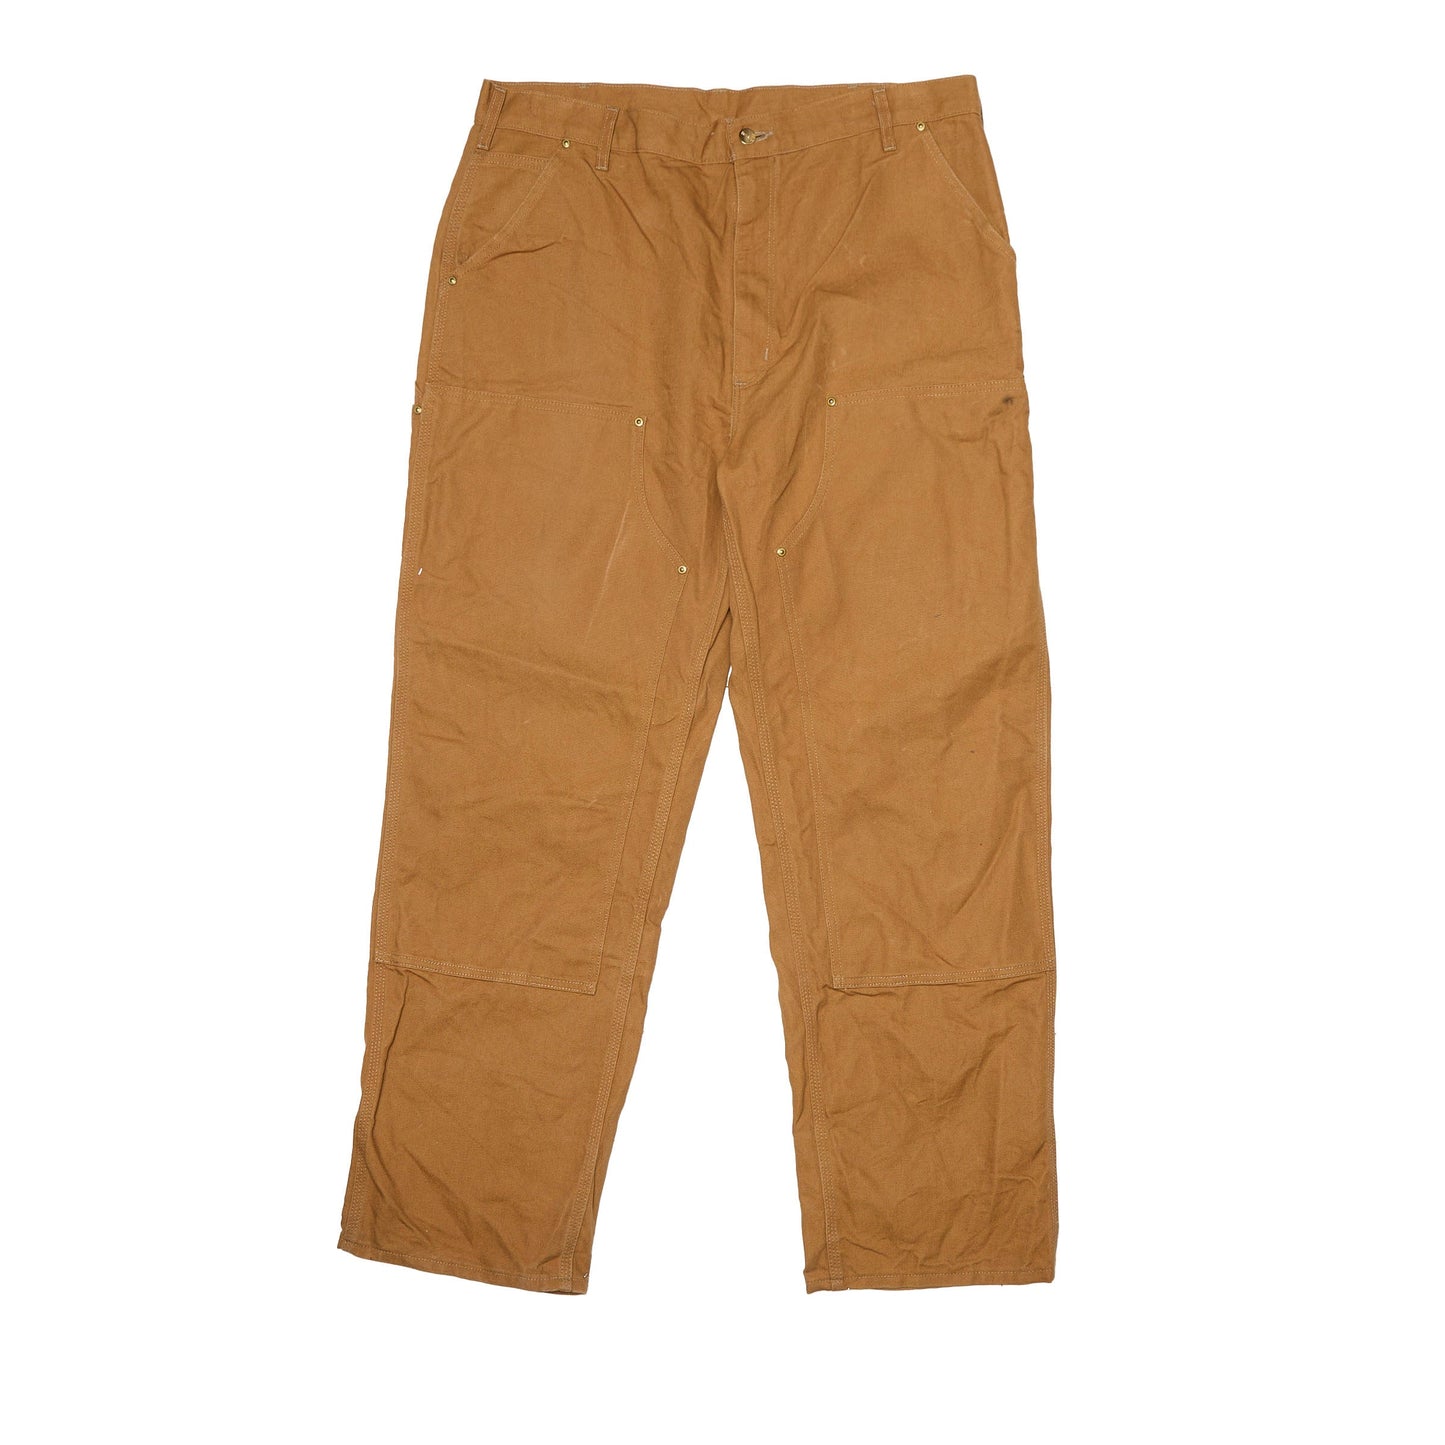 Mens Carhartt Thick Textured Wide Leg Trousers - W40" L32"